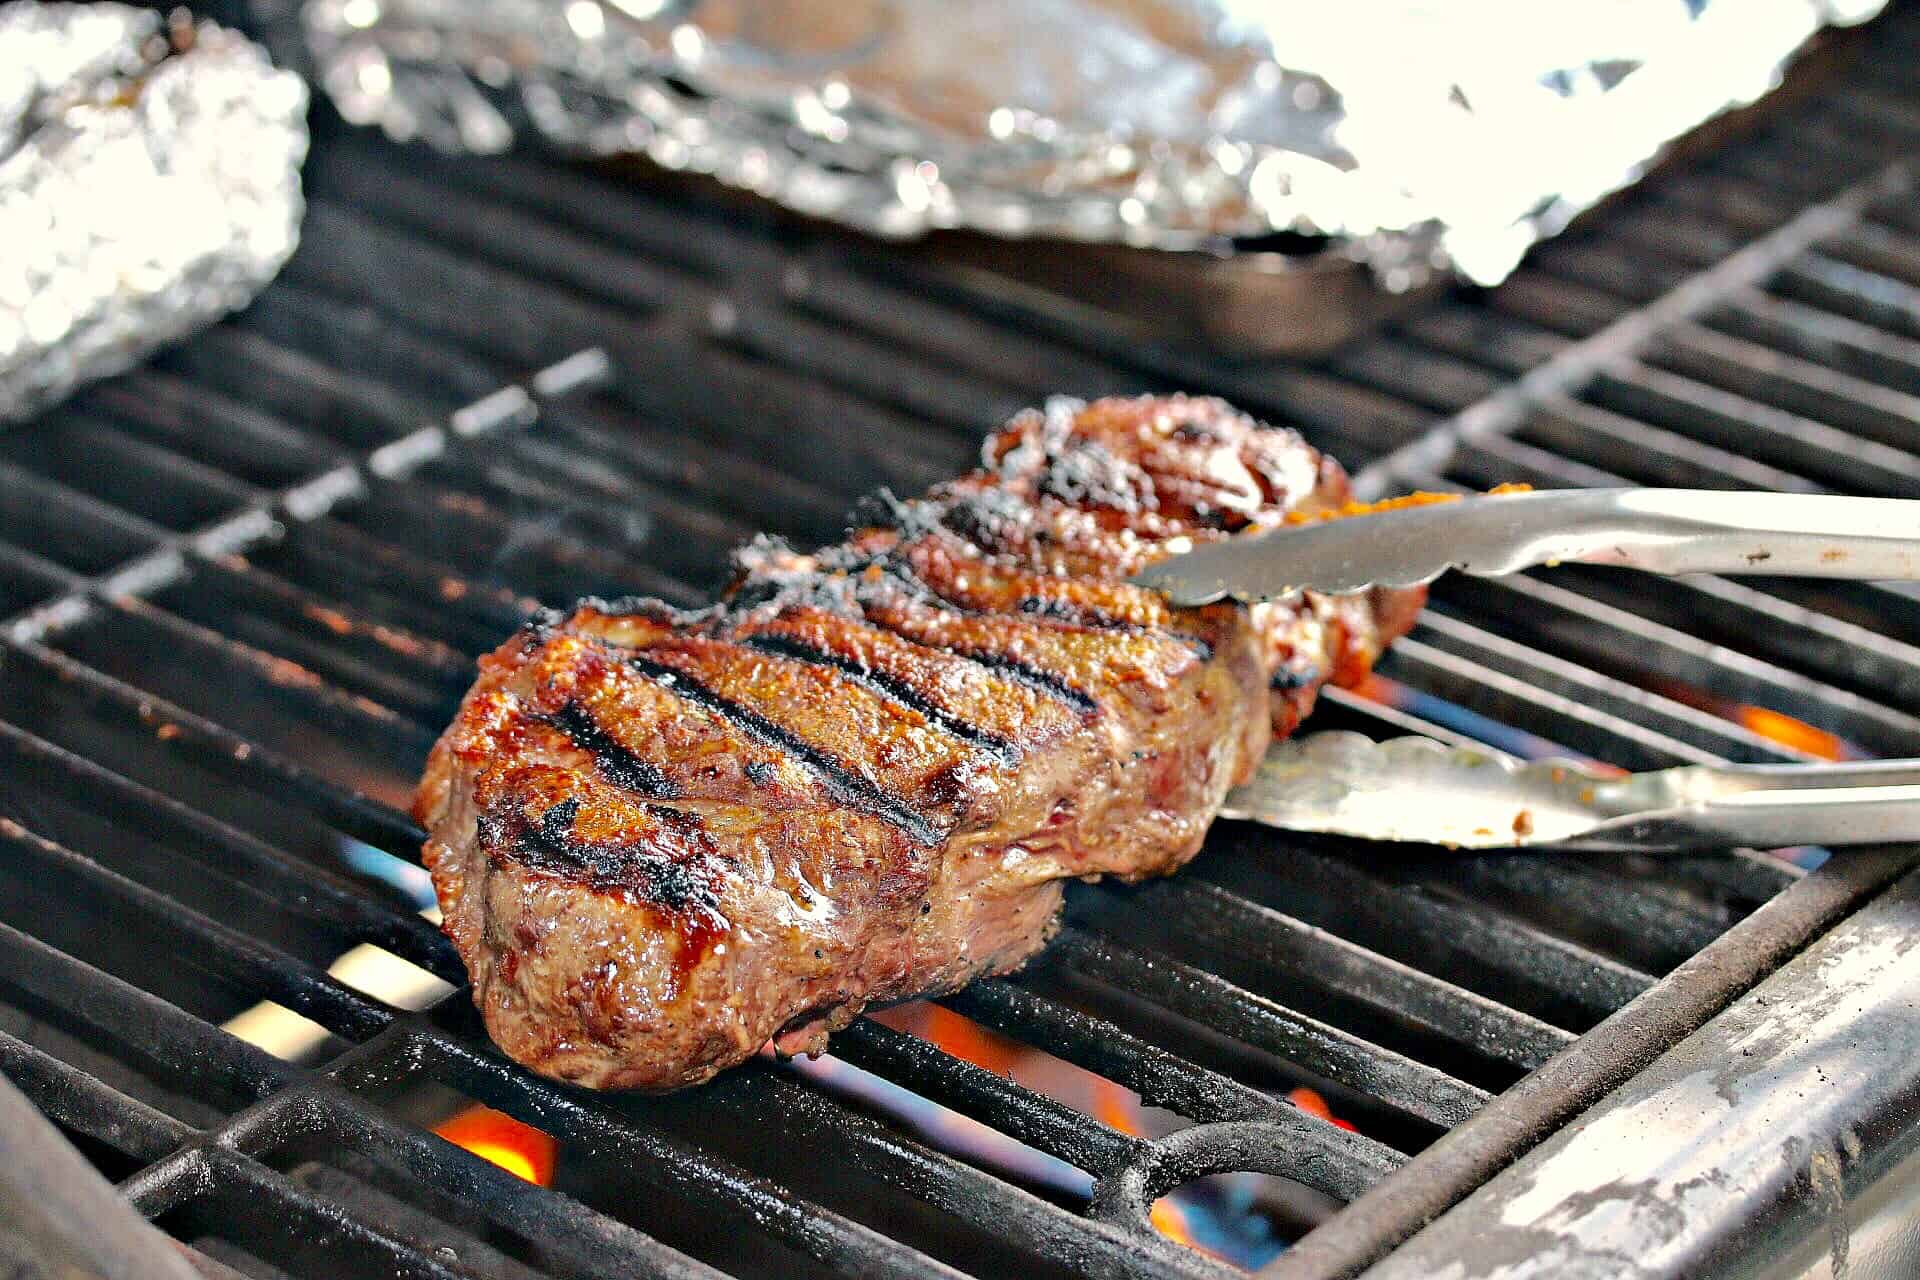 Steak on a grill being moved with tongs.